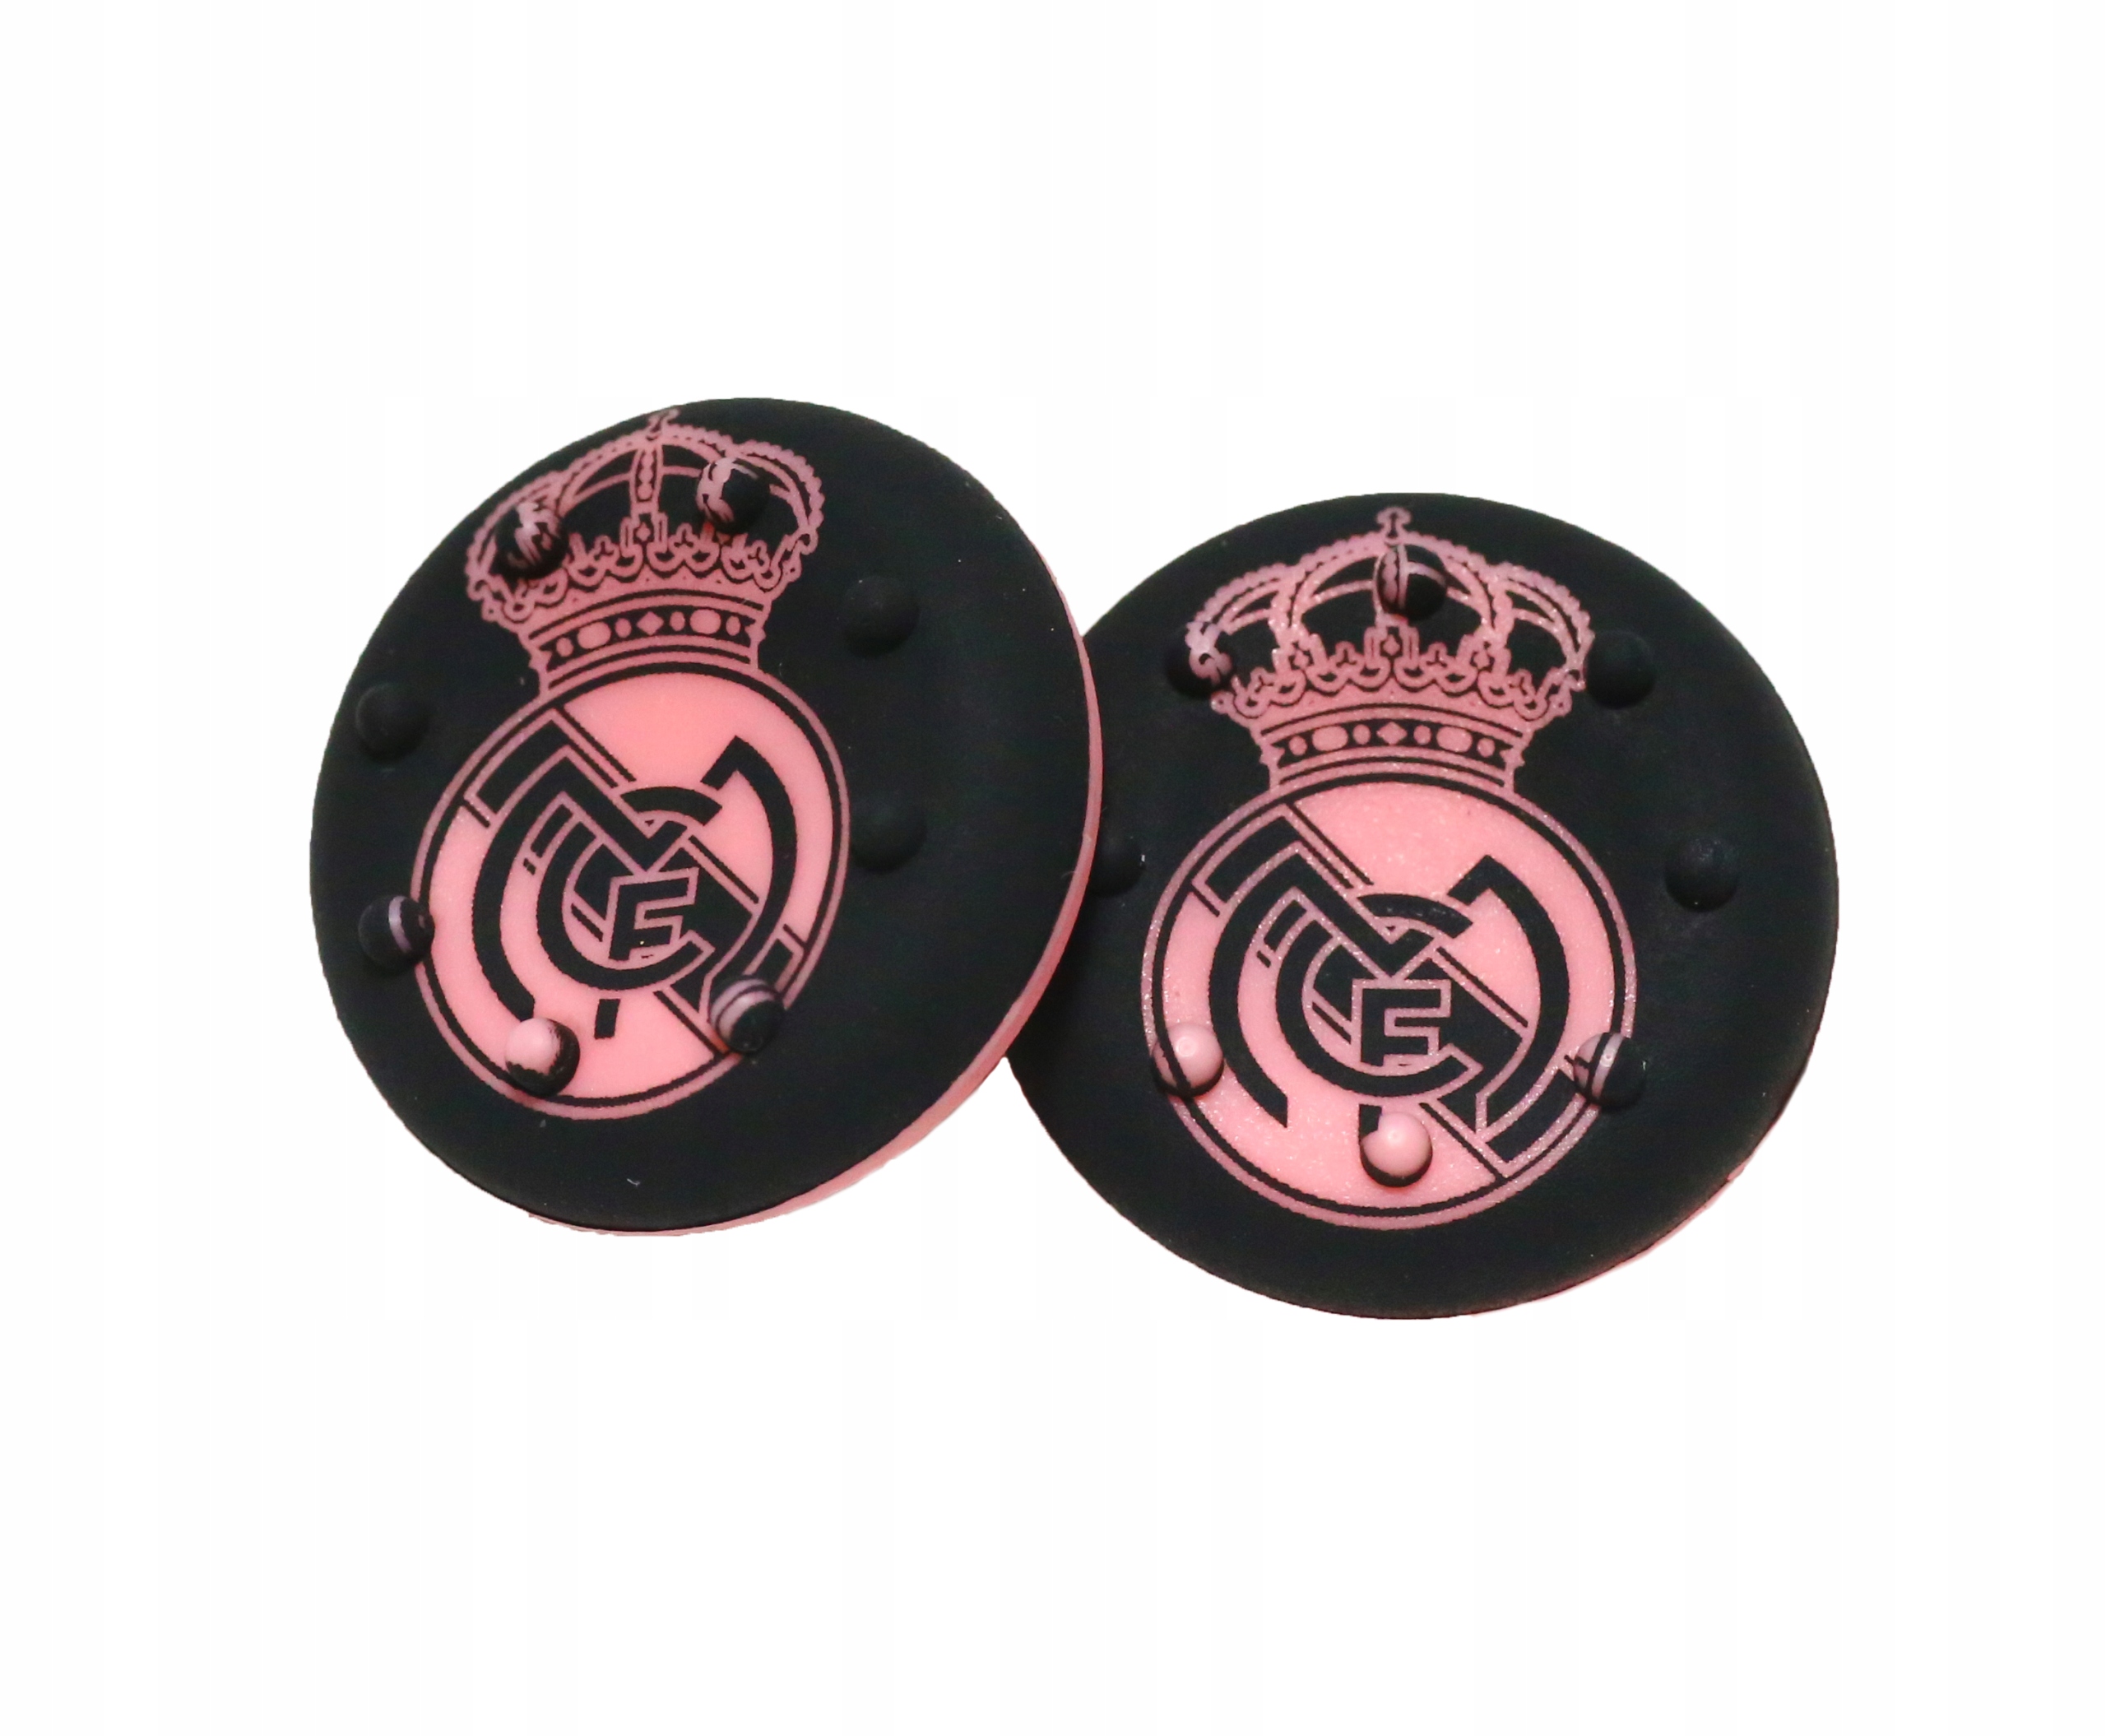 2x FIFA Cover Futbal Real Madrid (Pink)